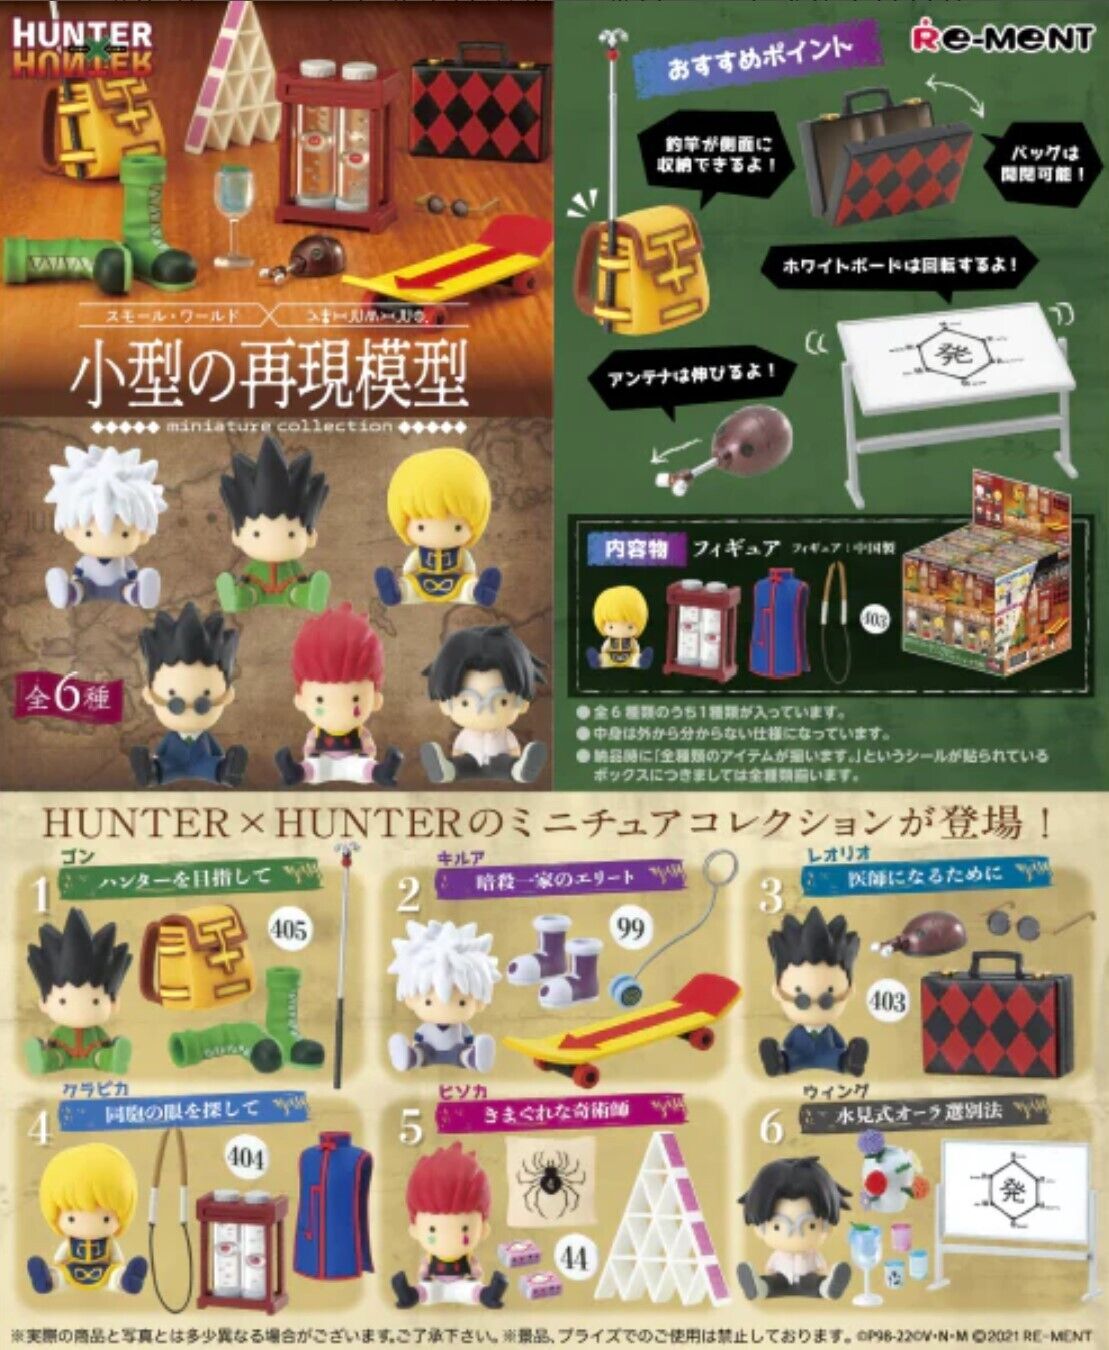 Re-Ment Hunter x Hunter Miniature Collection set of 6pc mini figures Brand New